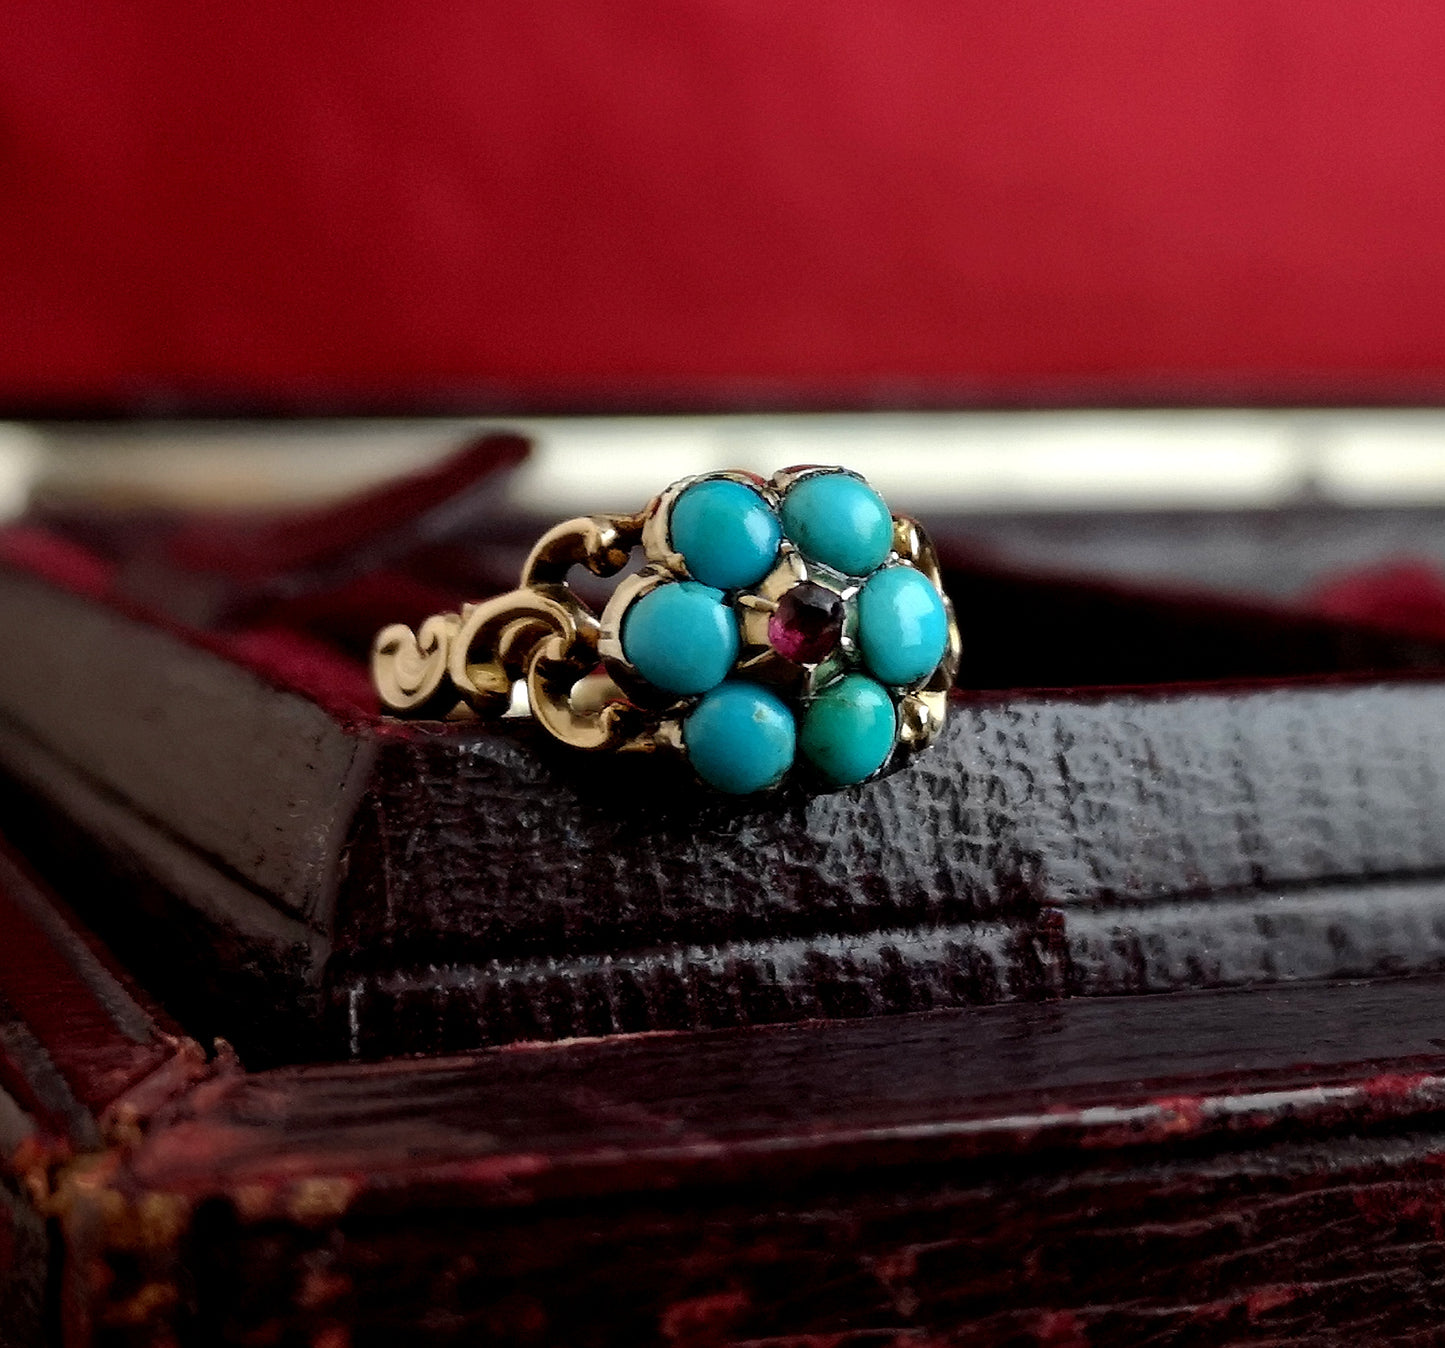 Antique Georgian mourning ring, 22ct gold, turquoise and Ruby